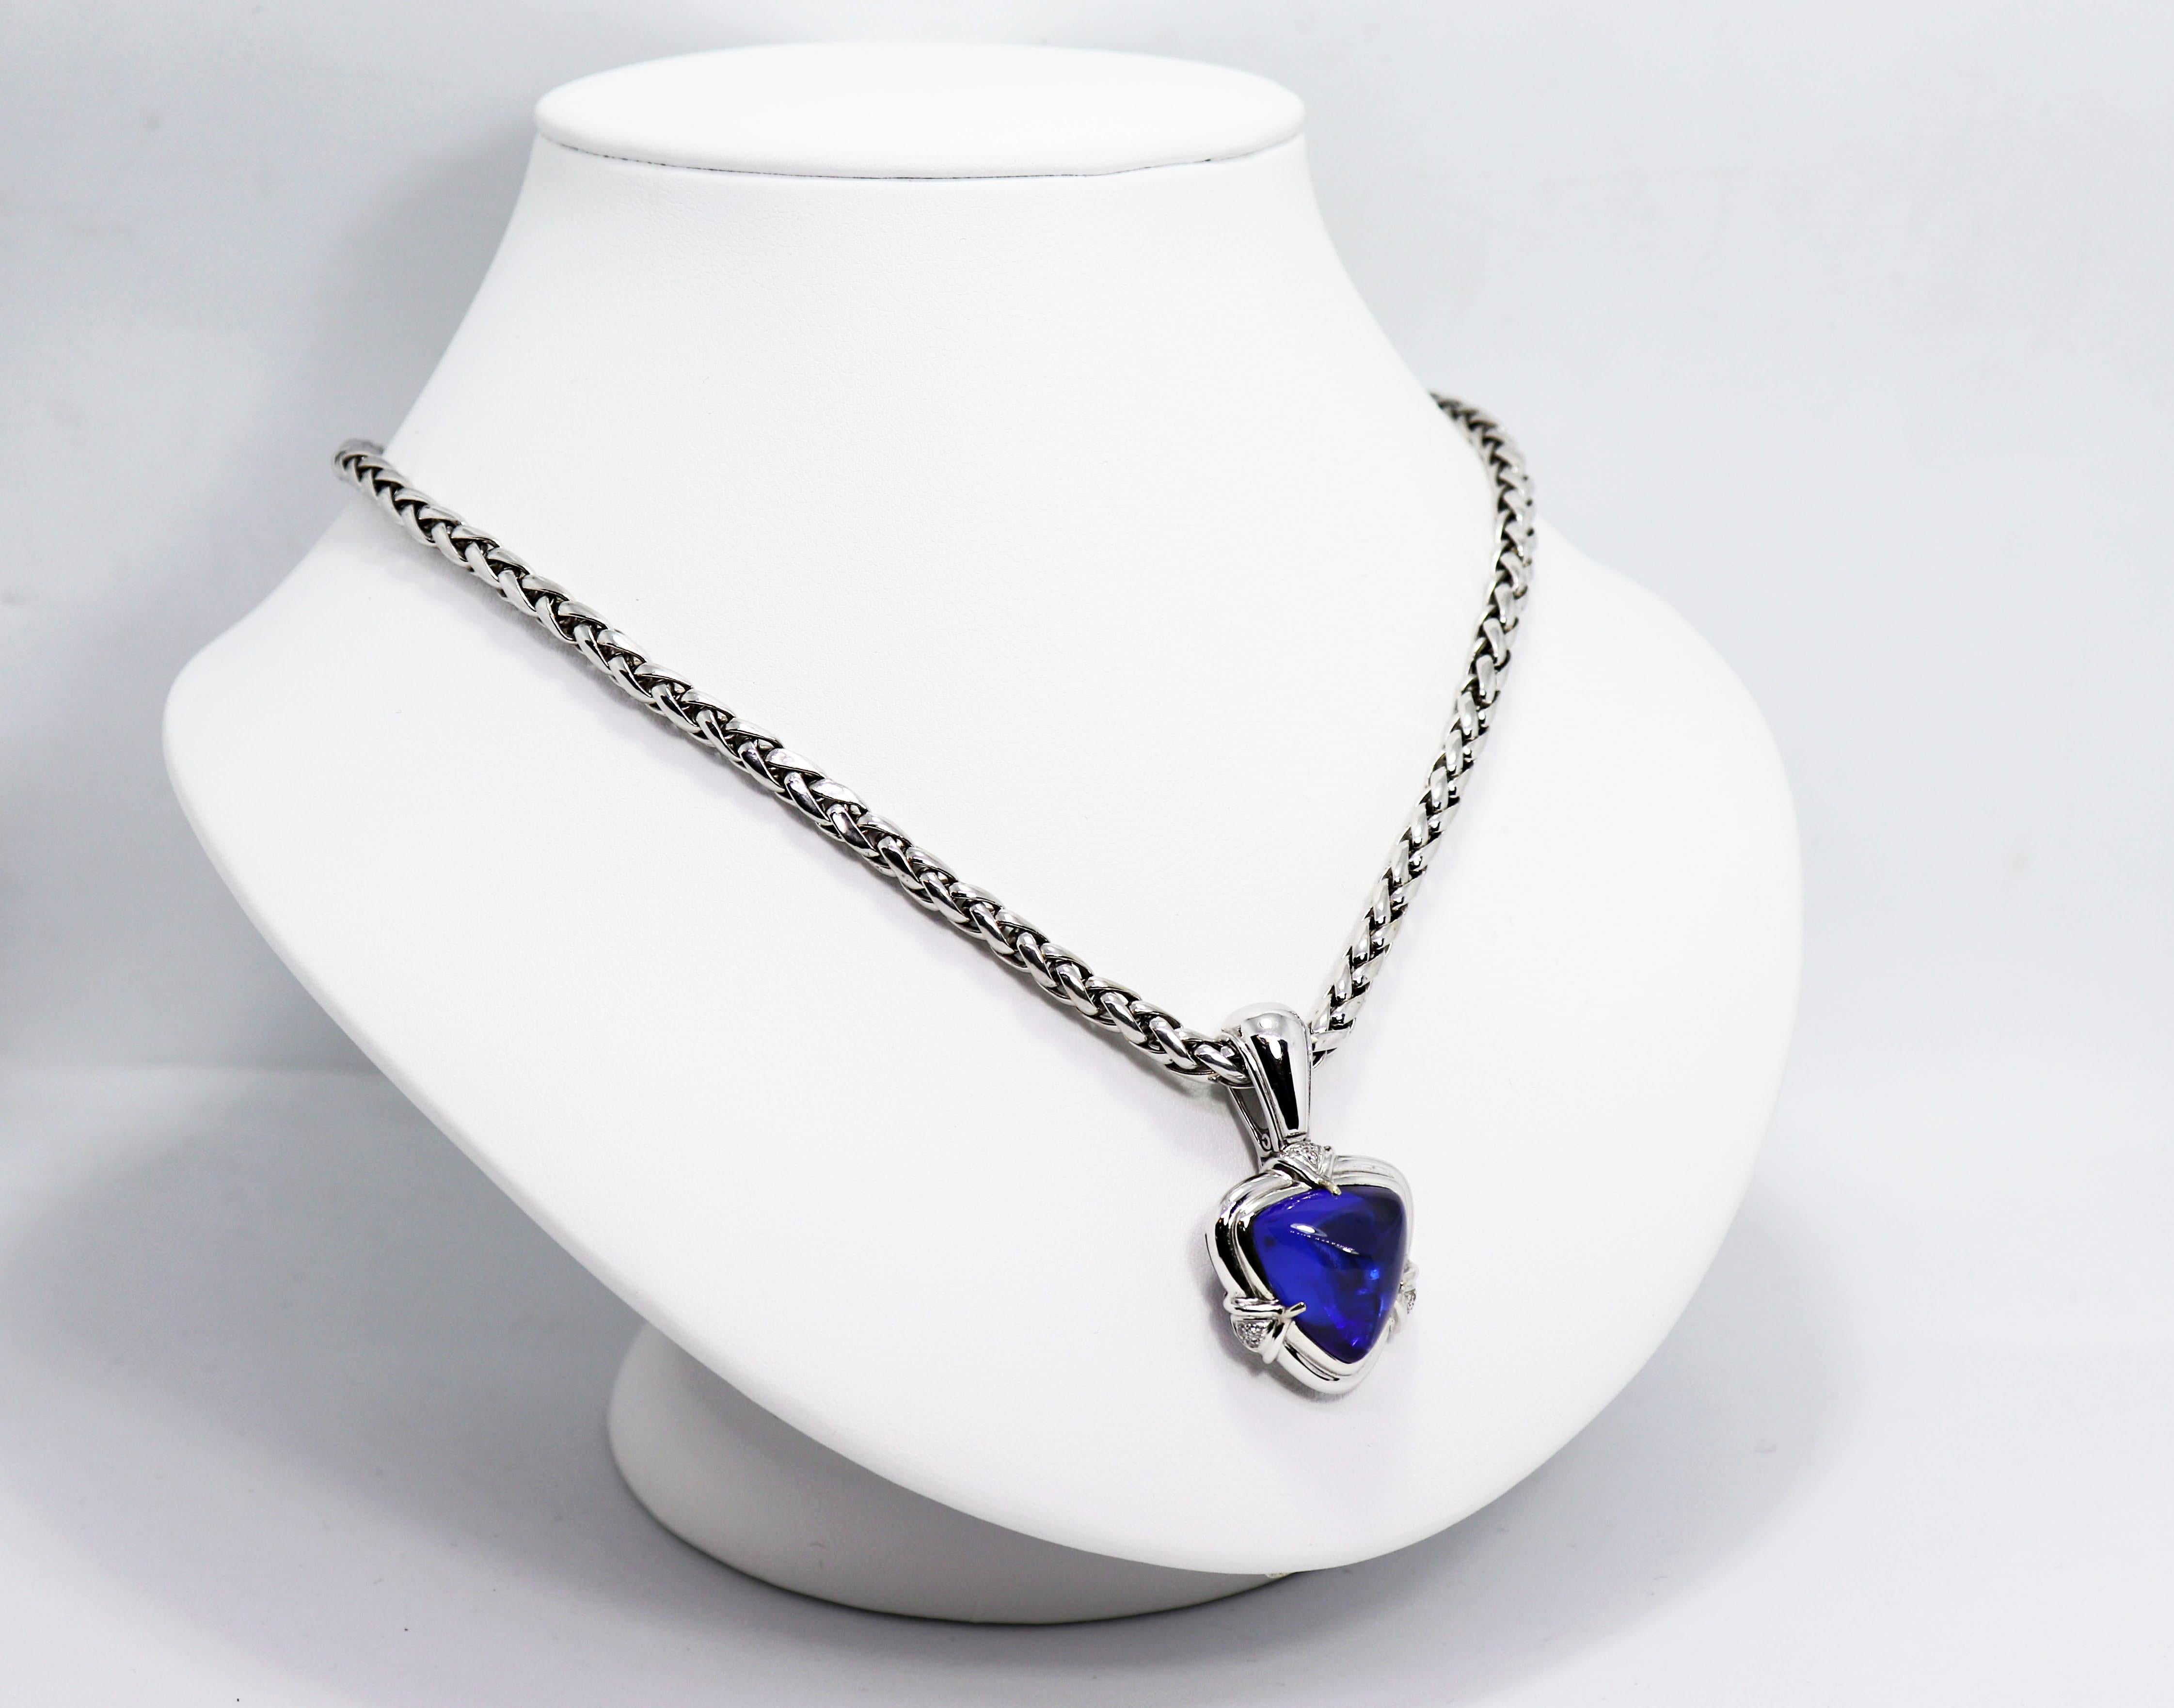 Beautiful necklace featuring a trillion shaped rare AAA+ grade vivid blue cabochon tanzanite weighing an impressive 15.05 carat in a rub-over, open back setting. The mount is further pavé set with nine brilliant cut diamonds weighing approximately